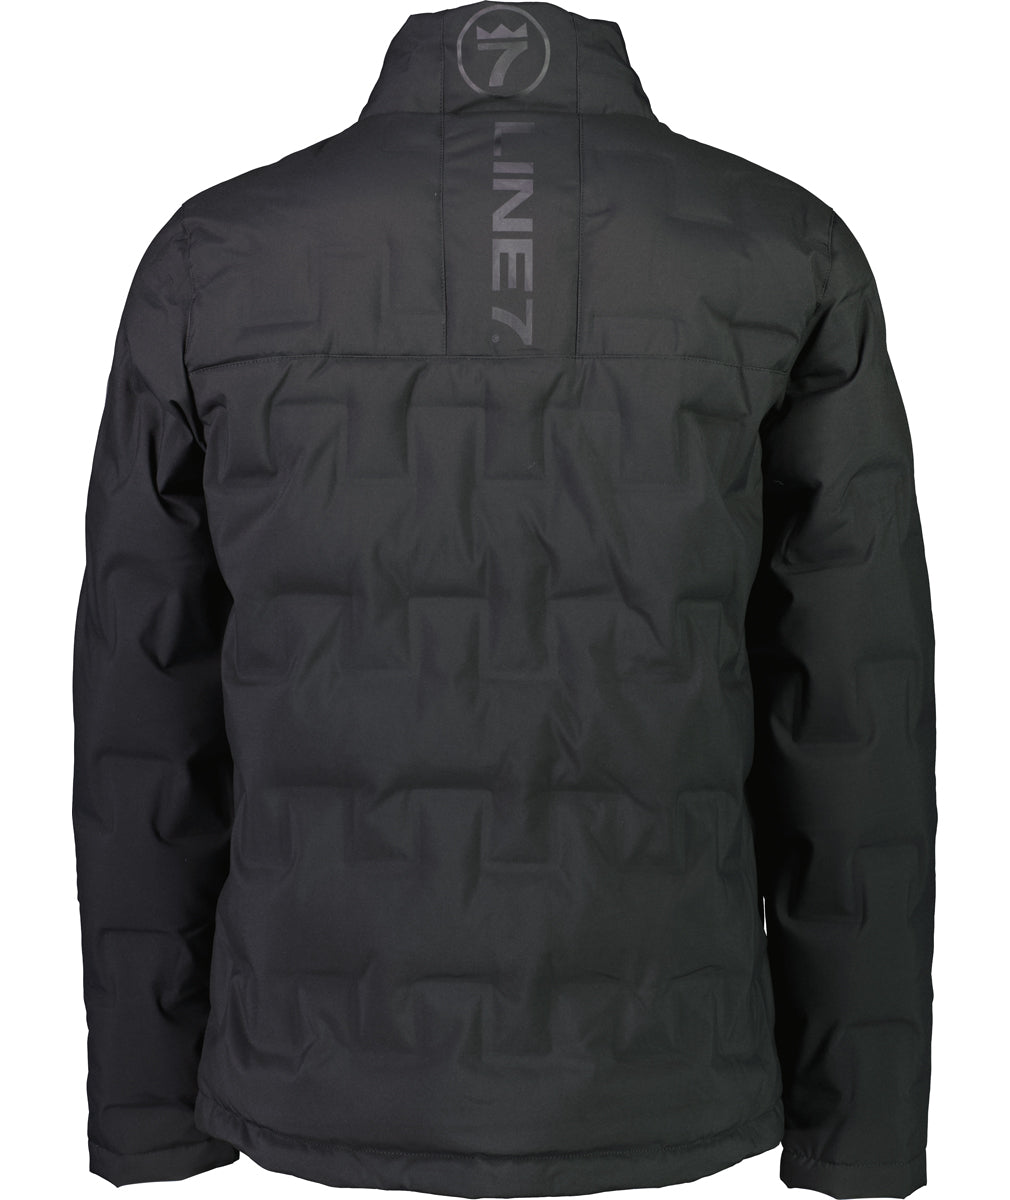 Line 7 Mens Ballast Insulated Down Jacket - Black